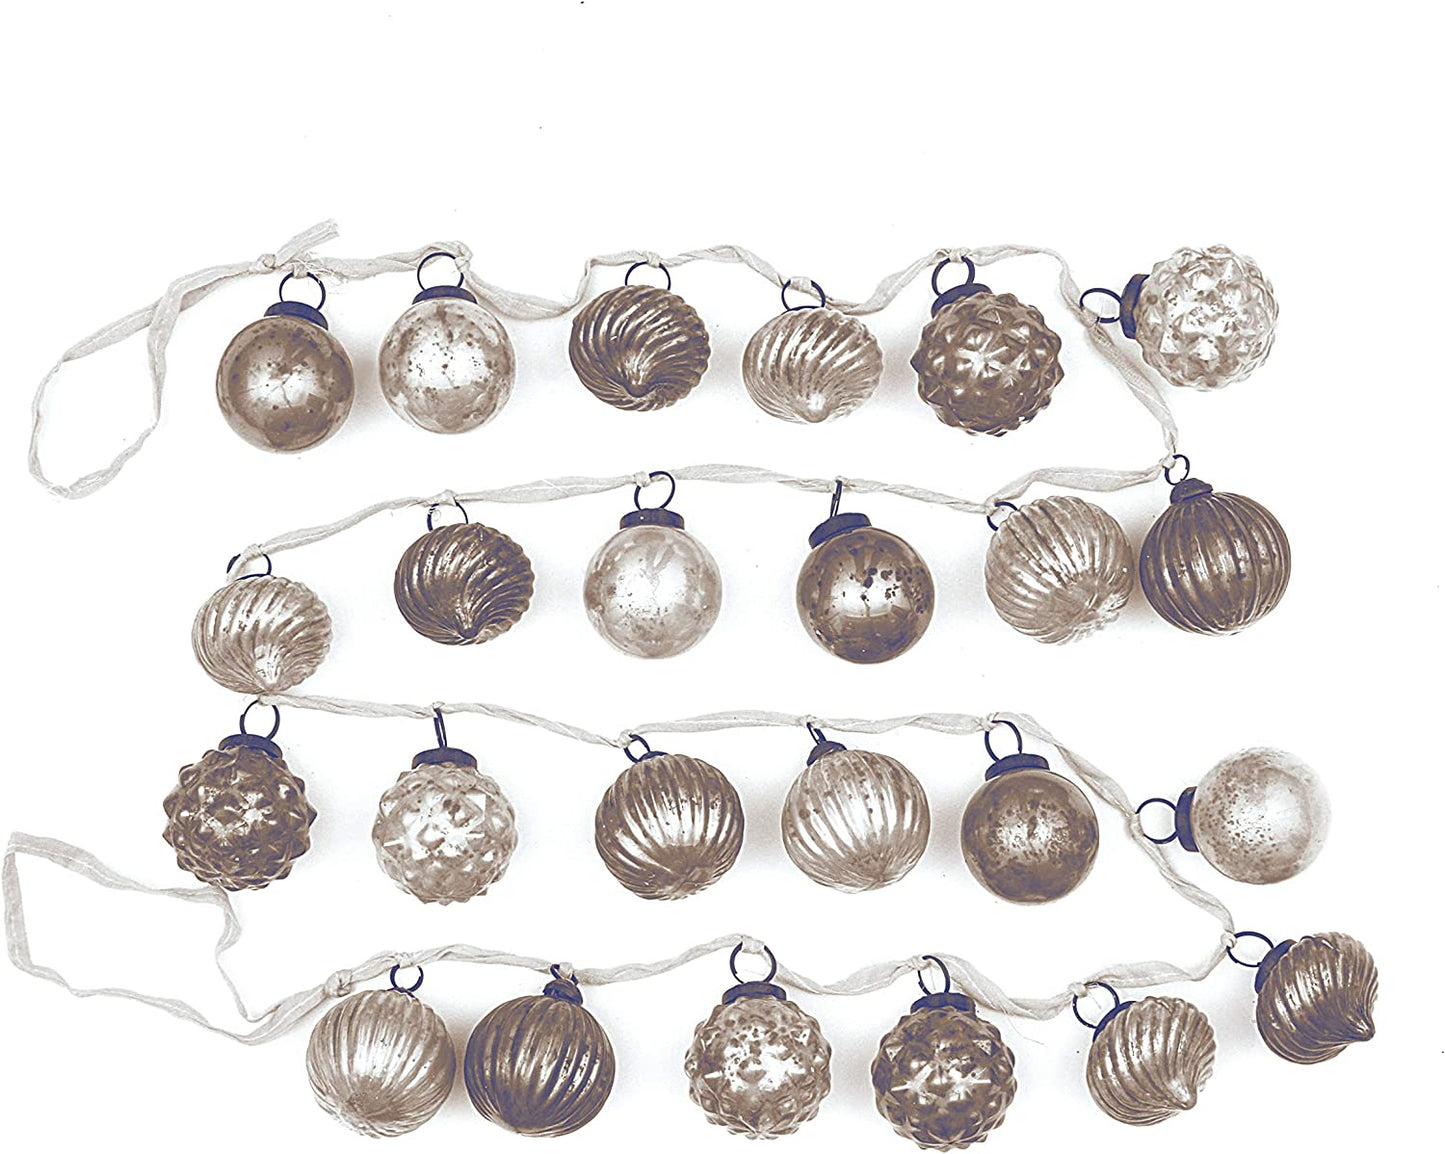 Creative Co-Op Distressed White & Grey Embossed Mercury Glass Ornament Fabric String Garland White and Grey